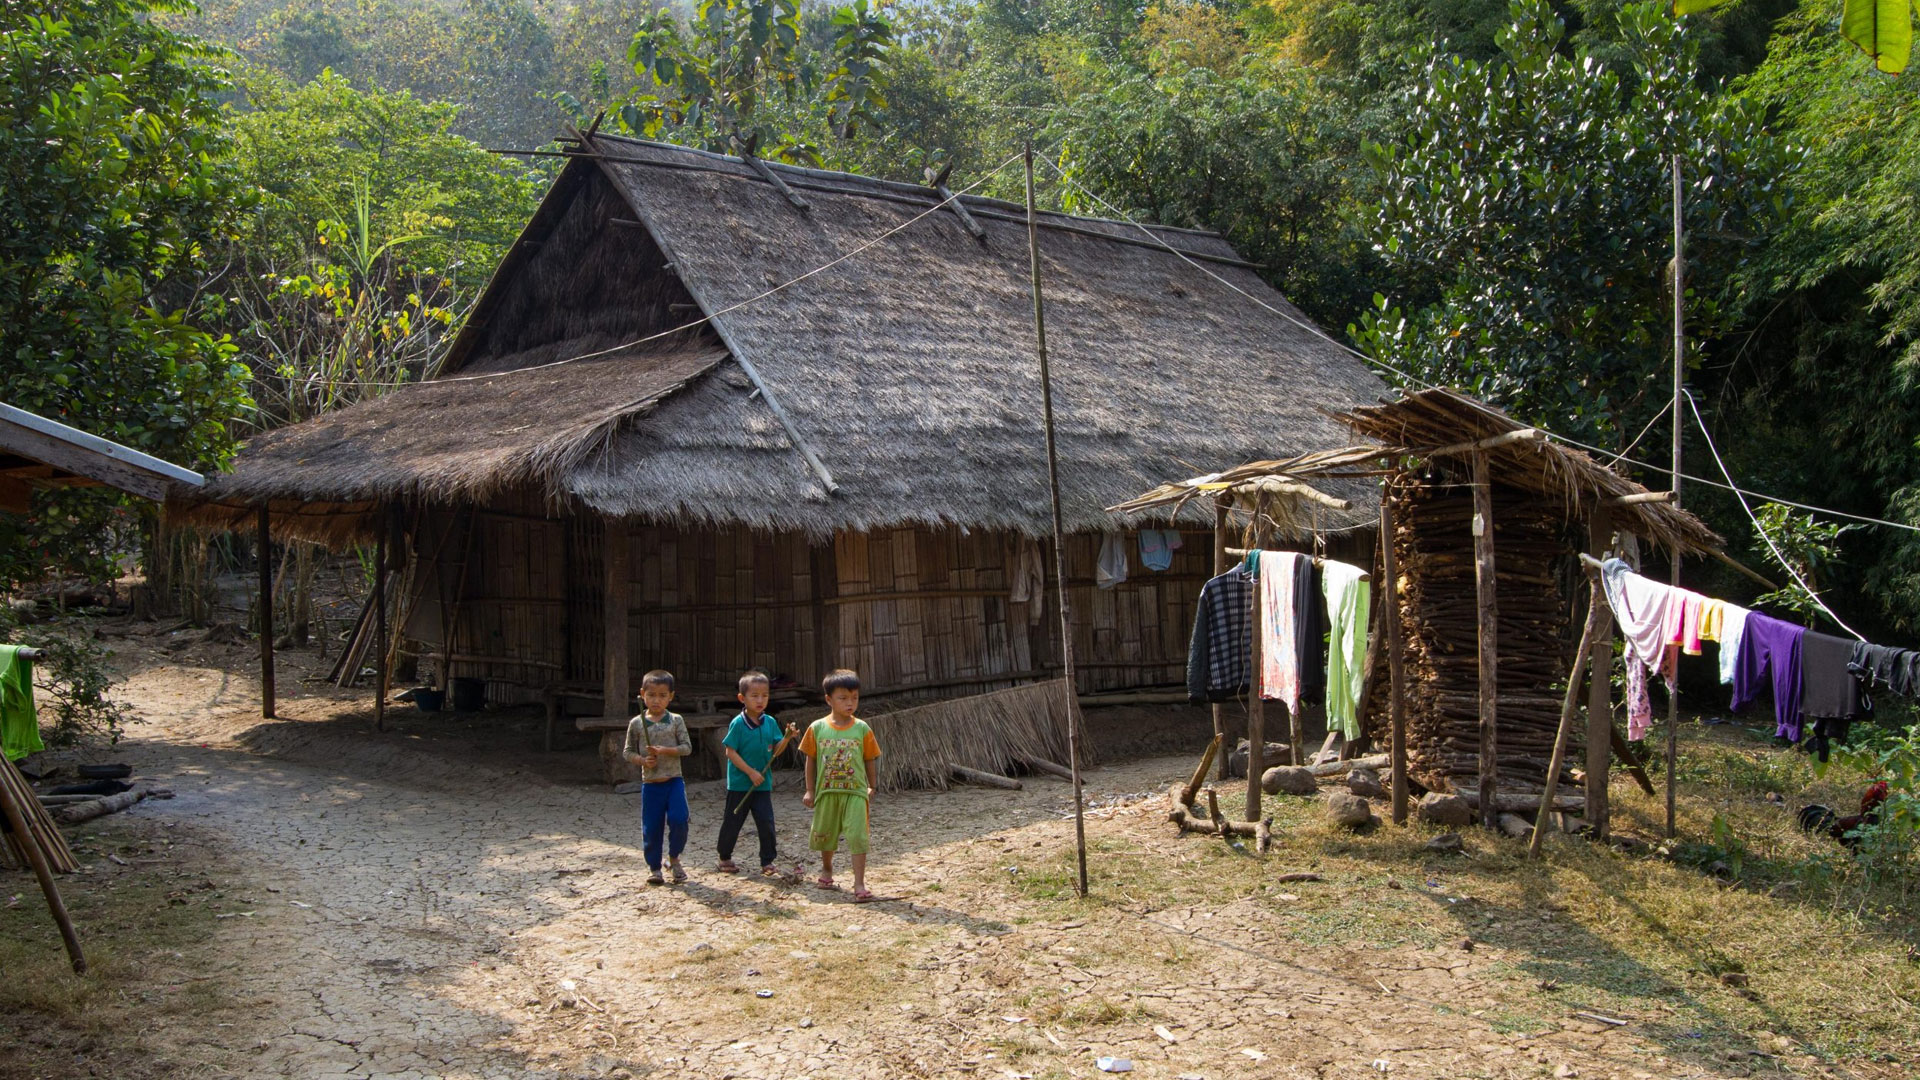 A photo of a local hill tribe in Laos